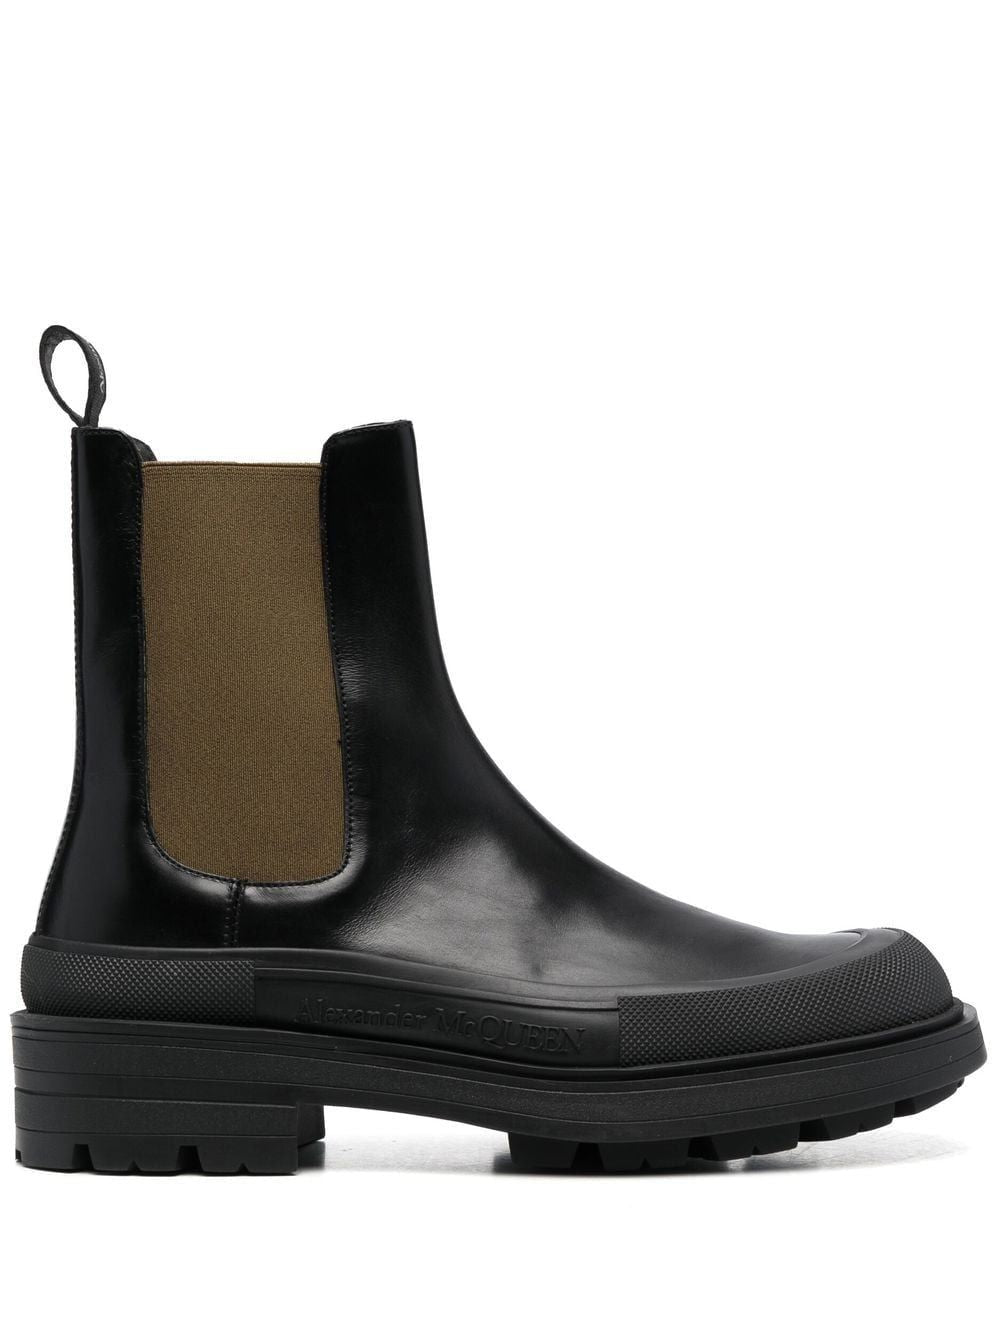 ALEXANDER MCQUEEN Men's Black Leather Chelsea Boots for SS23 - Elastic Inserts, Round Toe, 100% Rubber and Leather